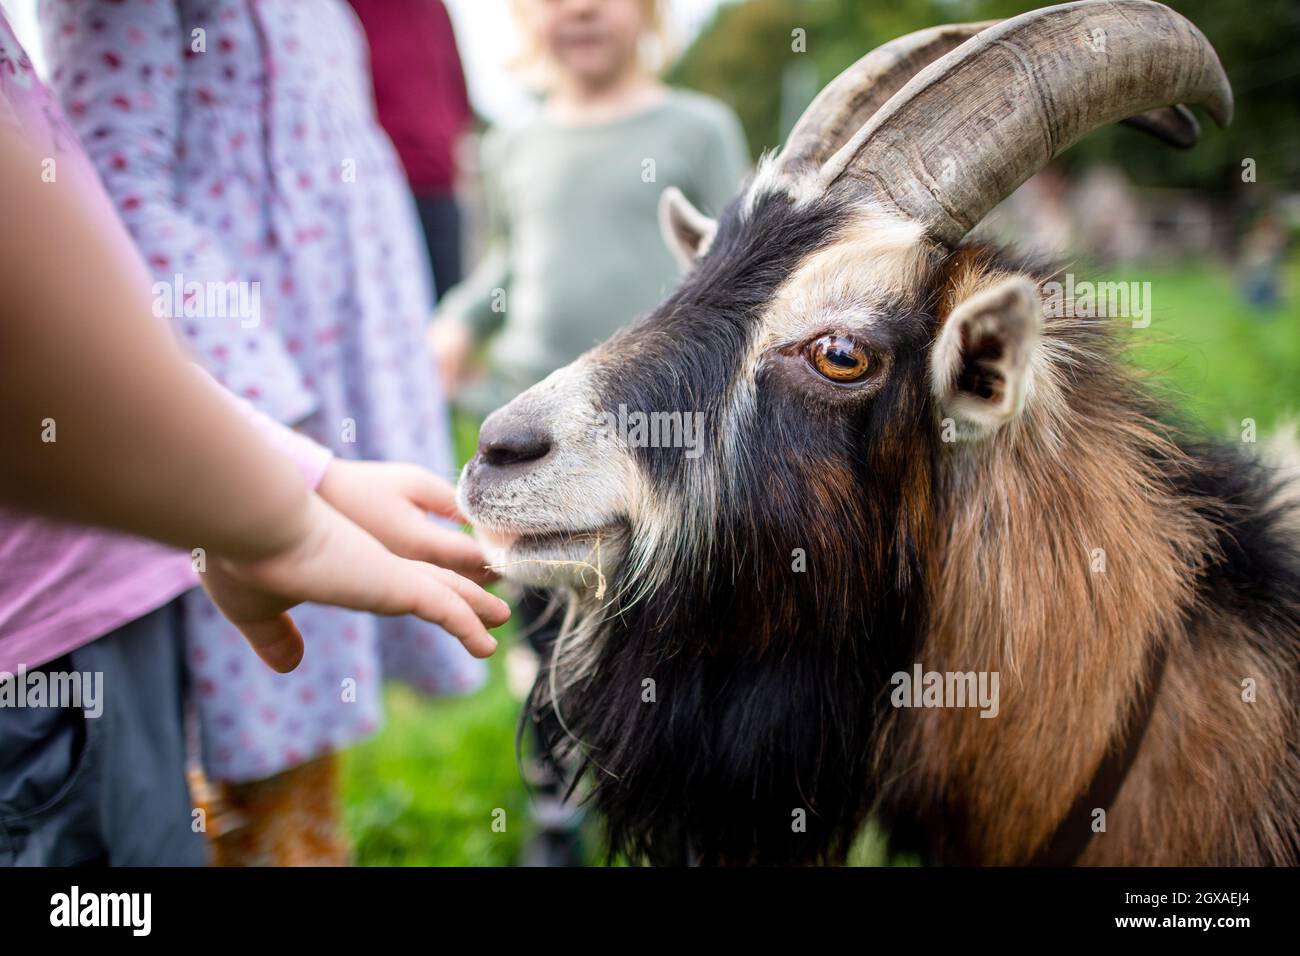 27 September 2021, Lower Saxony, Löningen: A goat is petted by children on a farm. Nature, animals and lots of fresh air - many families have spent their summer holidays on a holiday farm. Lower Saxony farms are also popular destinations for the coming autumn holidays. Photo: Sina Schuldt/dpa Stock Photo